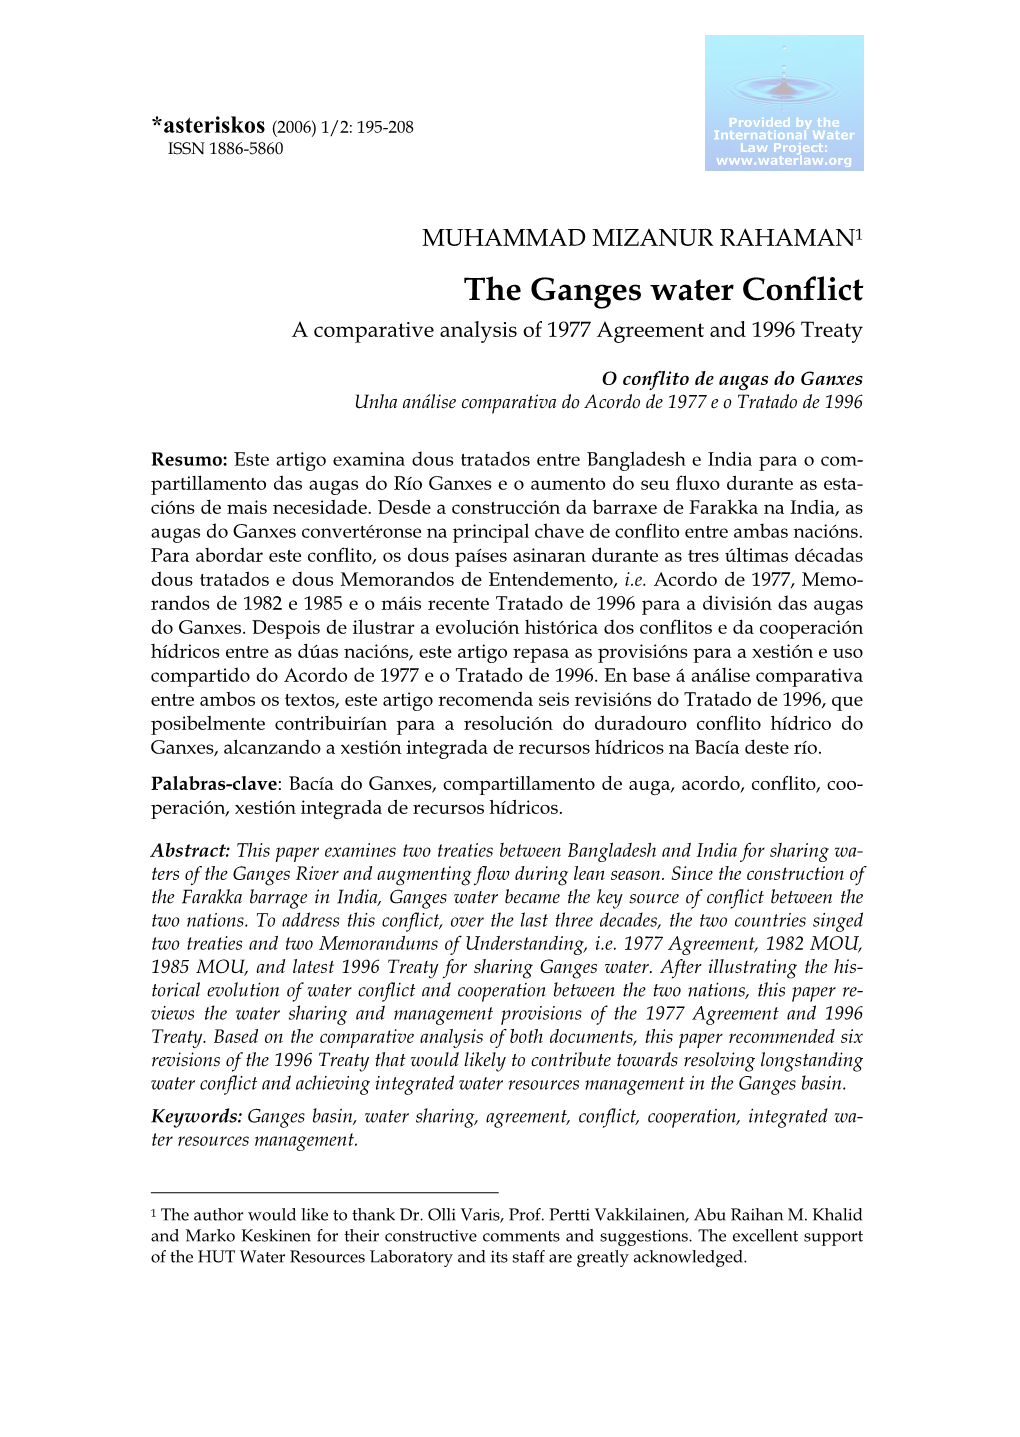 The Ganges Water Conflict a Comparative Analysis of 1977 Agreement and 1996 Treaty